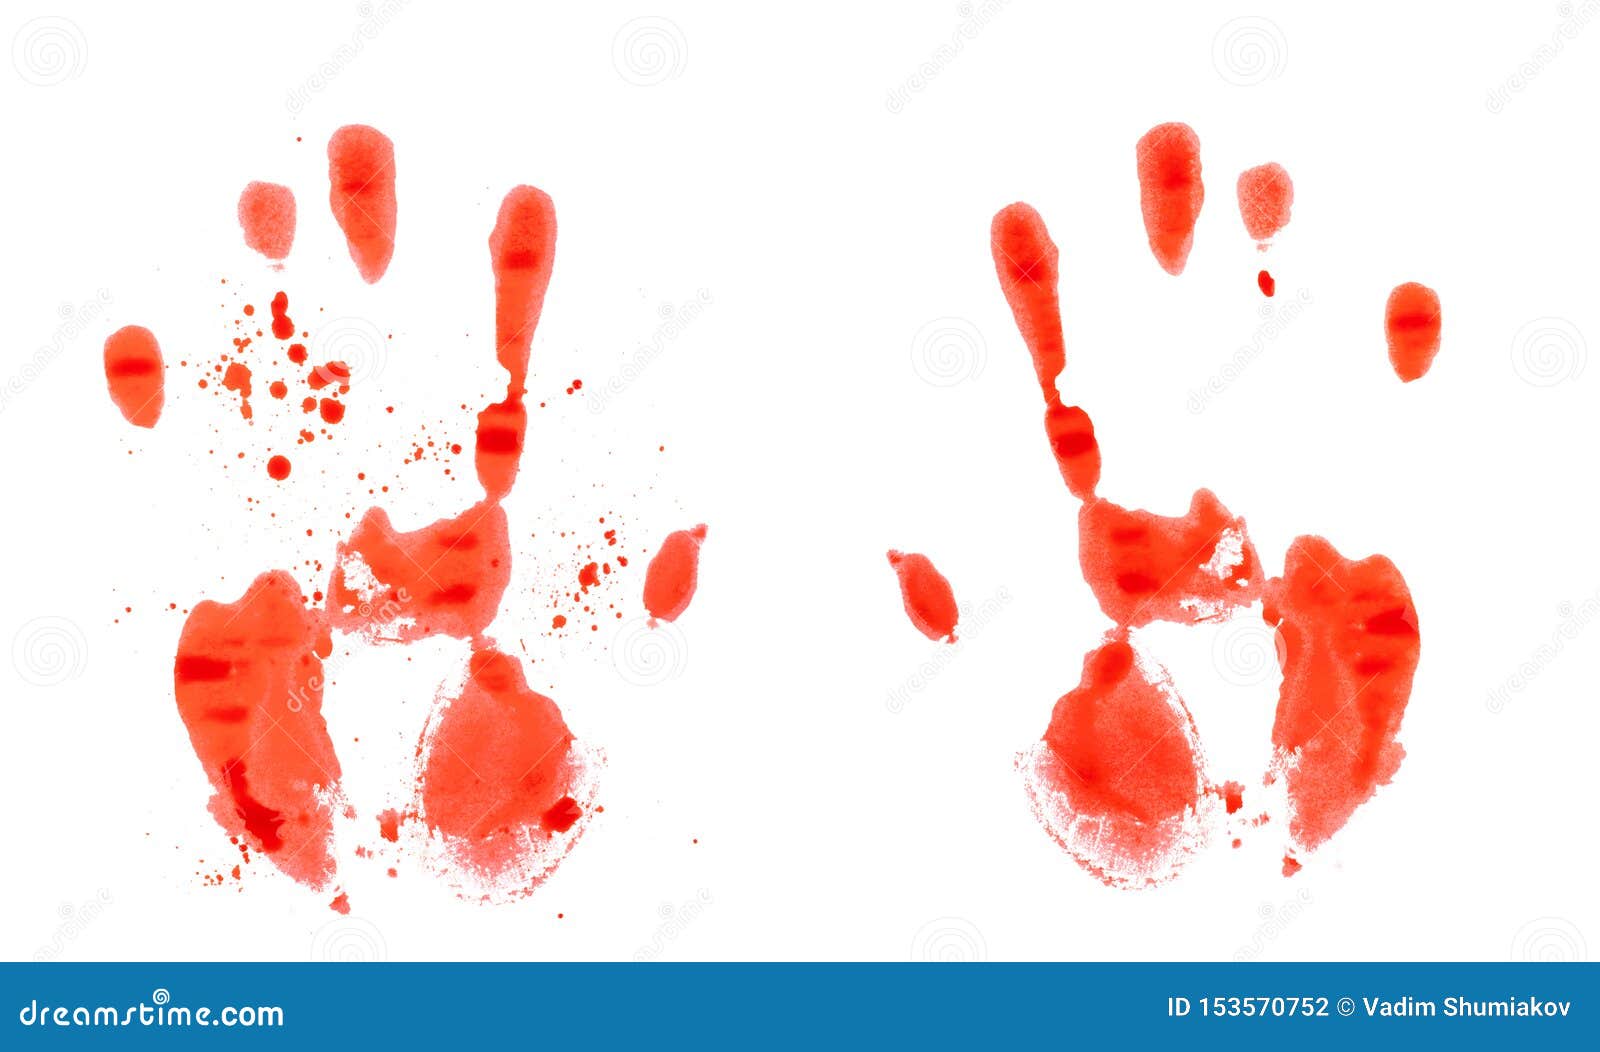 Handprint clipart bloody, Handprint bloody Transparent FREE for ...